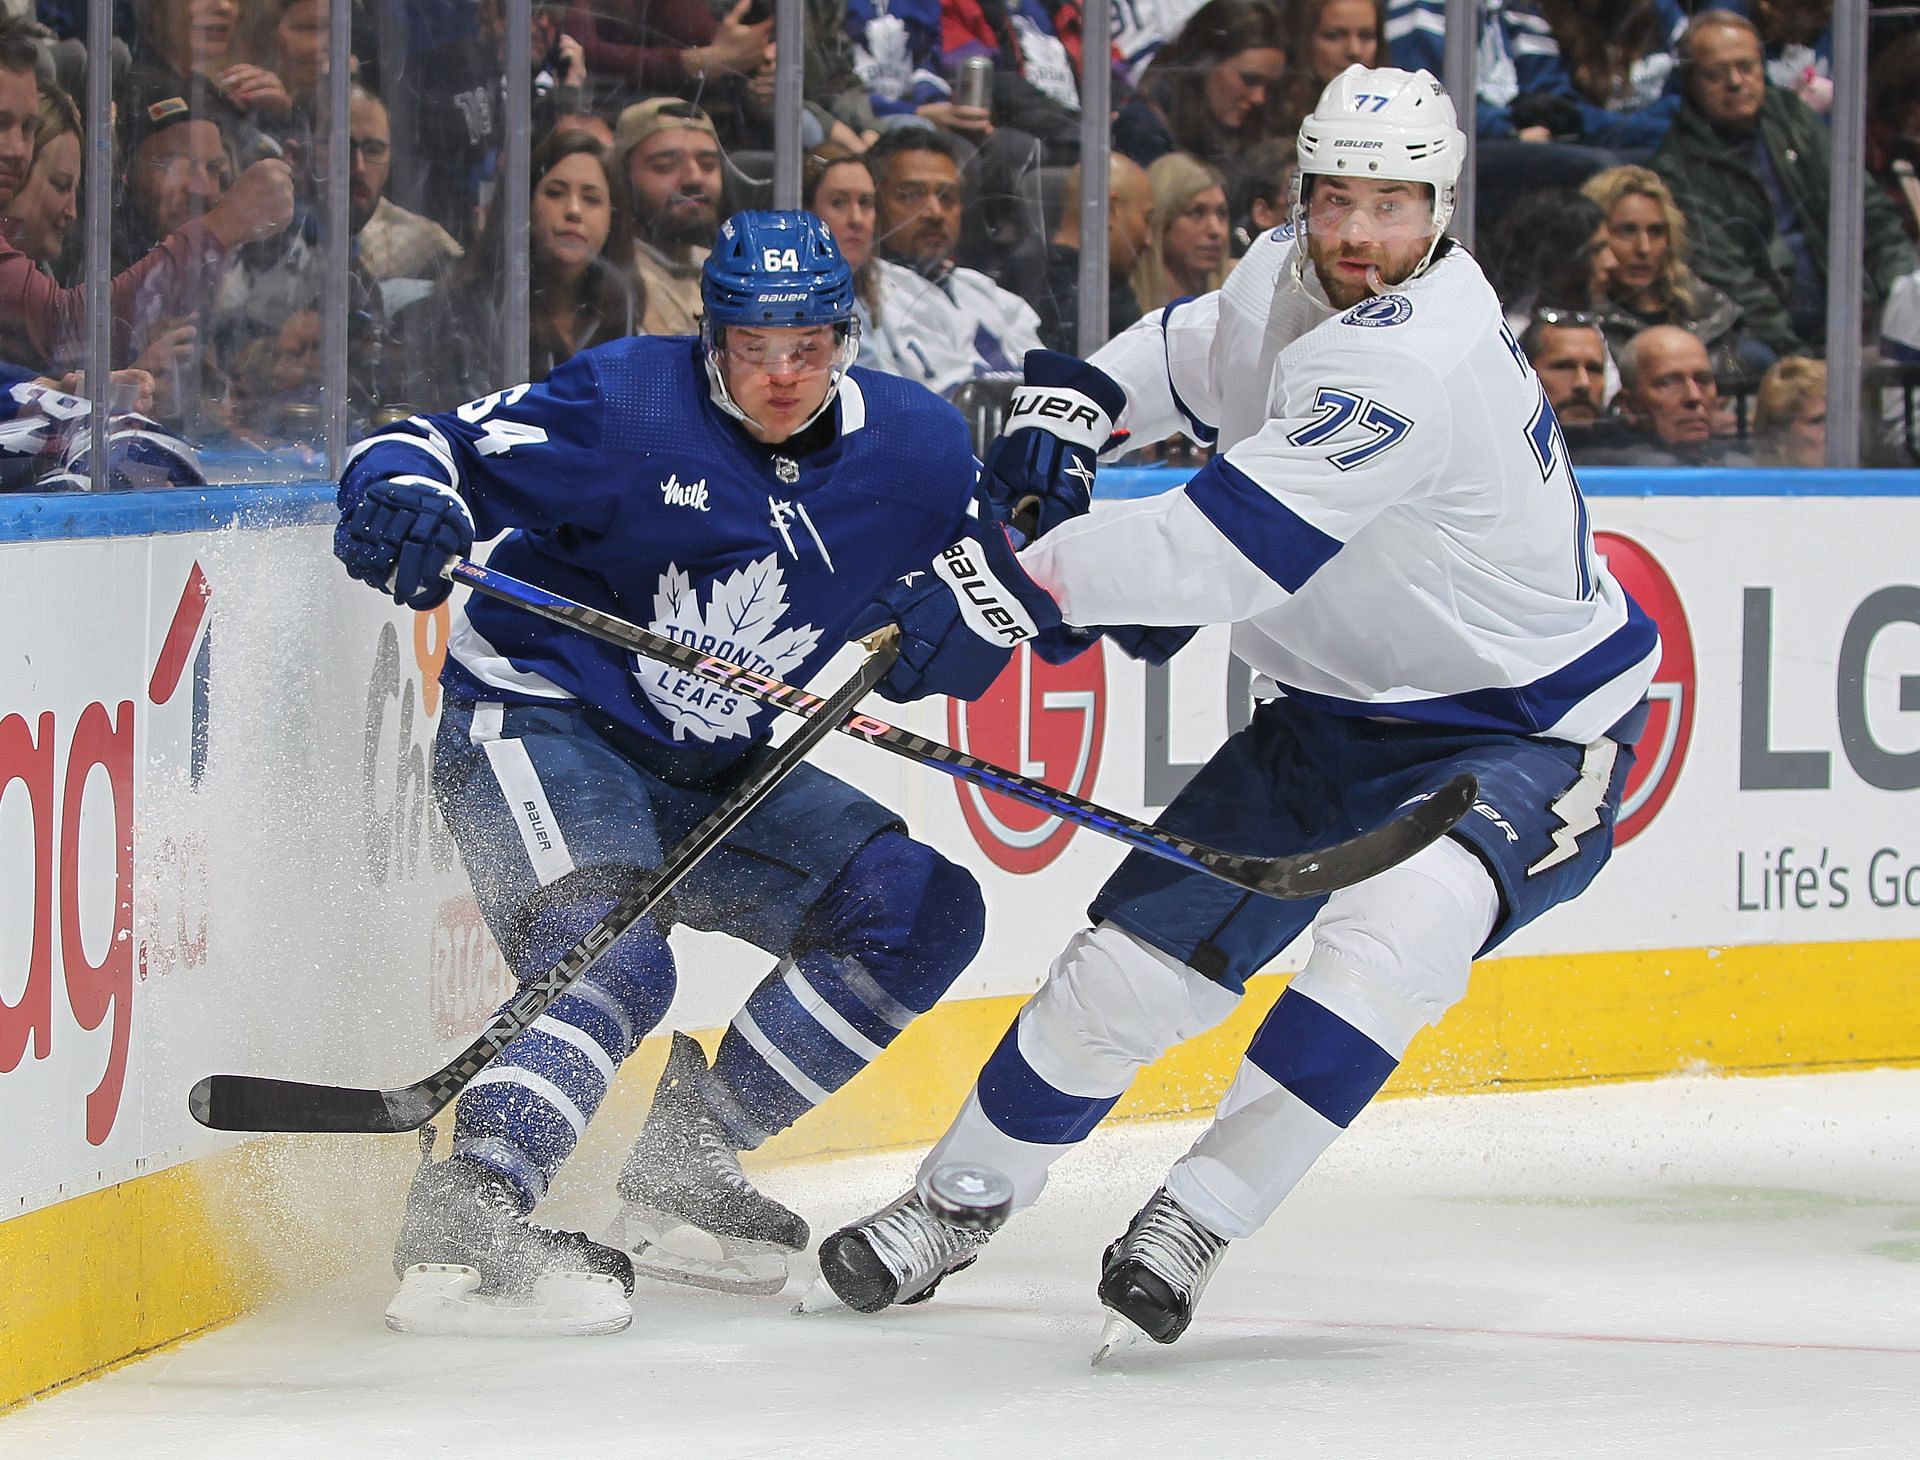 Lightning vs. Maple Leafs: Game 7 decides it all